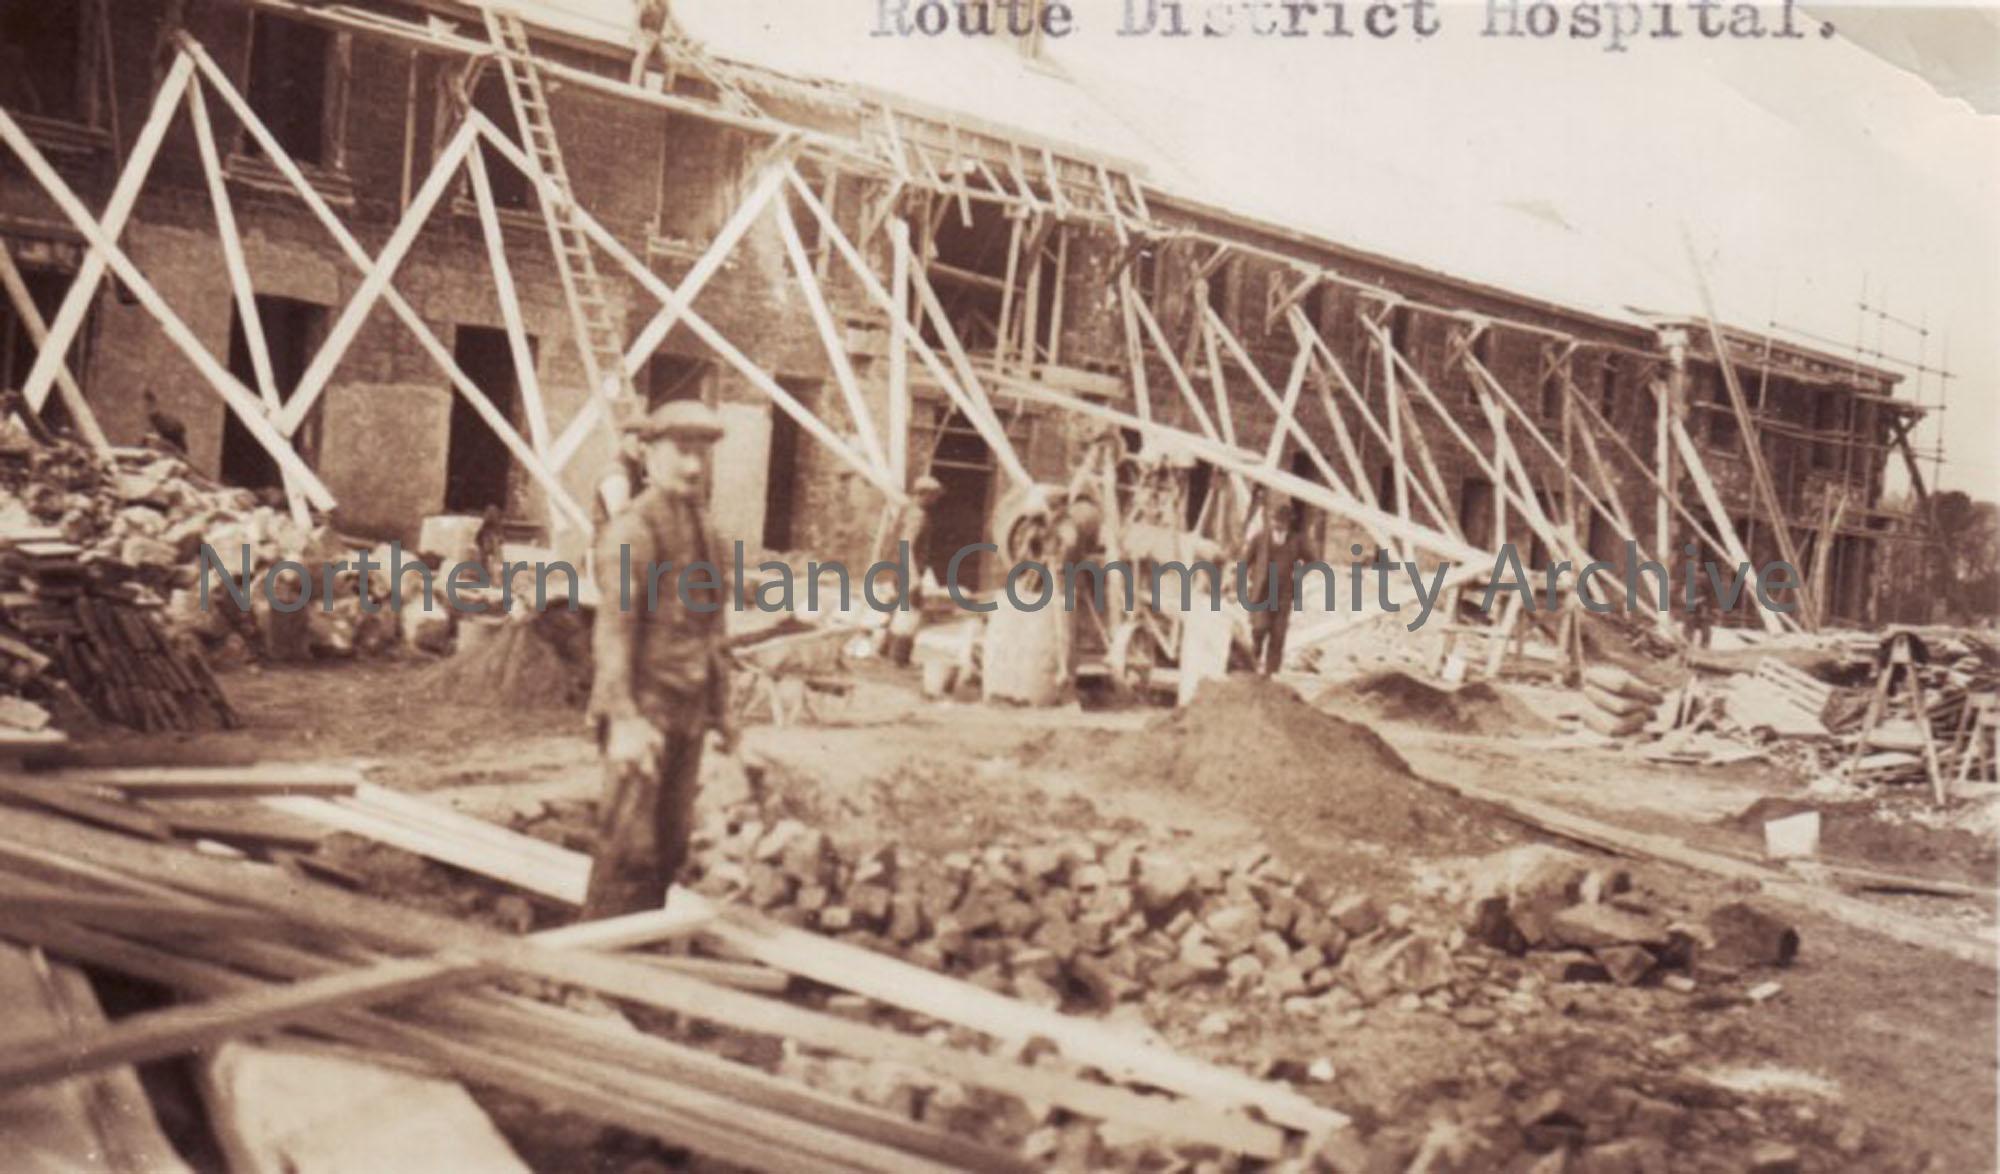 Conversion of the workhouse to the Route Hospital. Construction work.